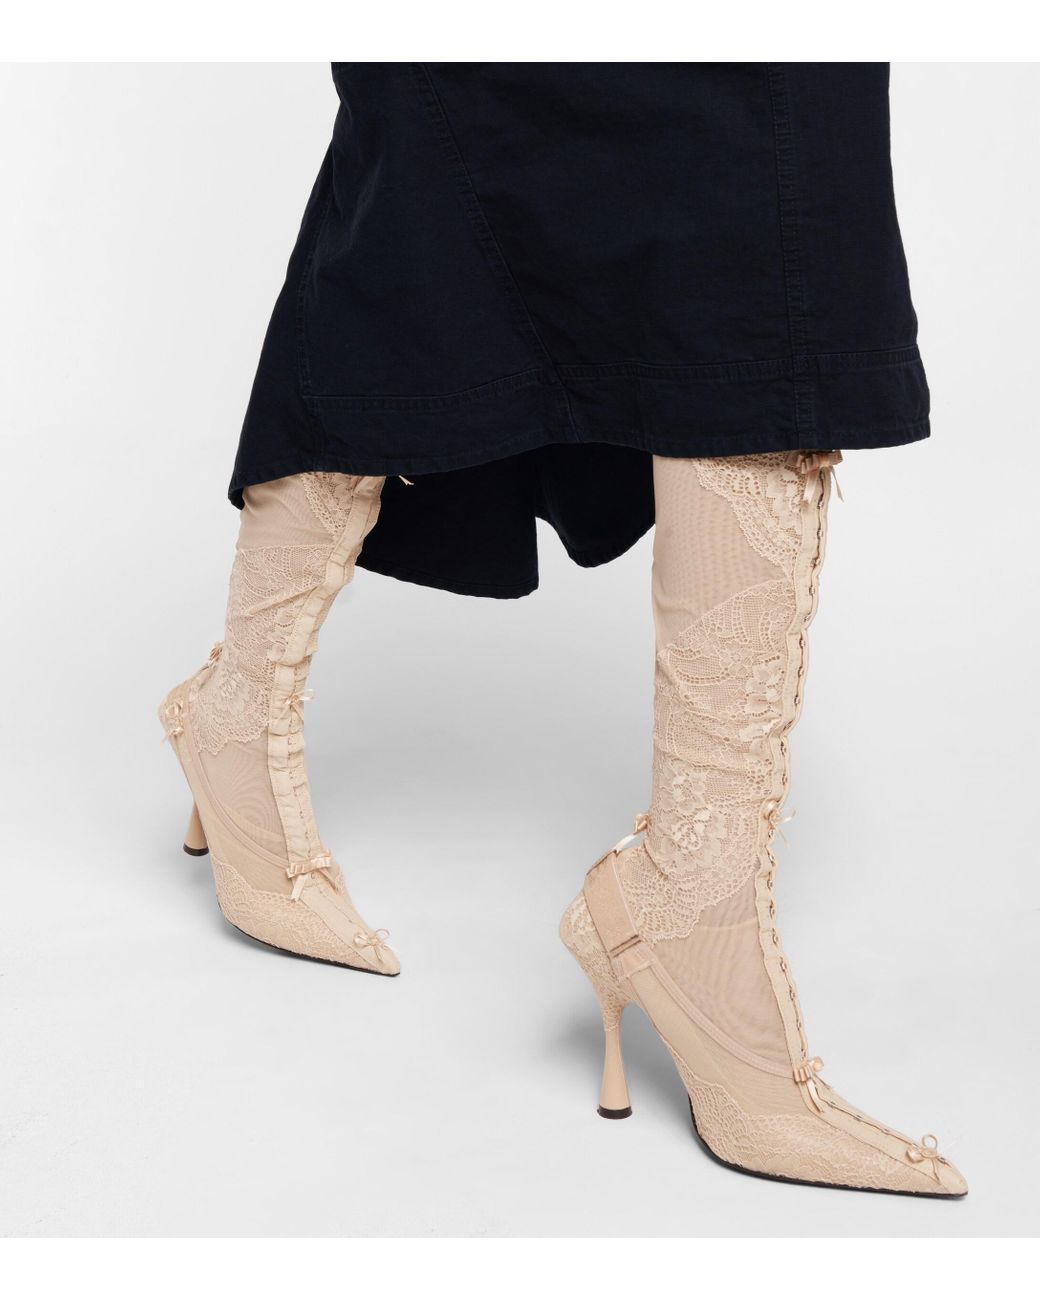 Balenciaga Lingerie Knife Over-the-knee Boots in Natural | Lyst